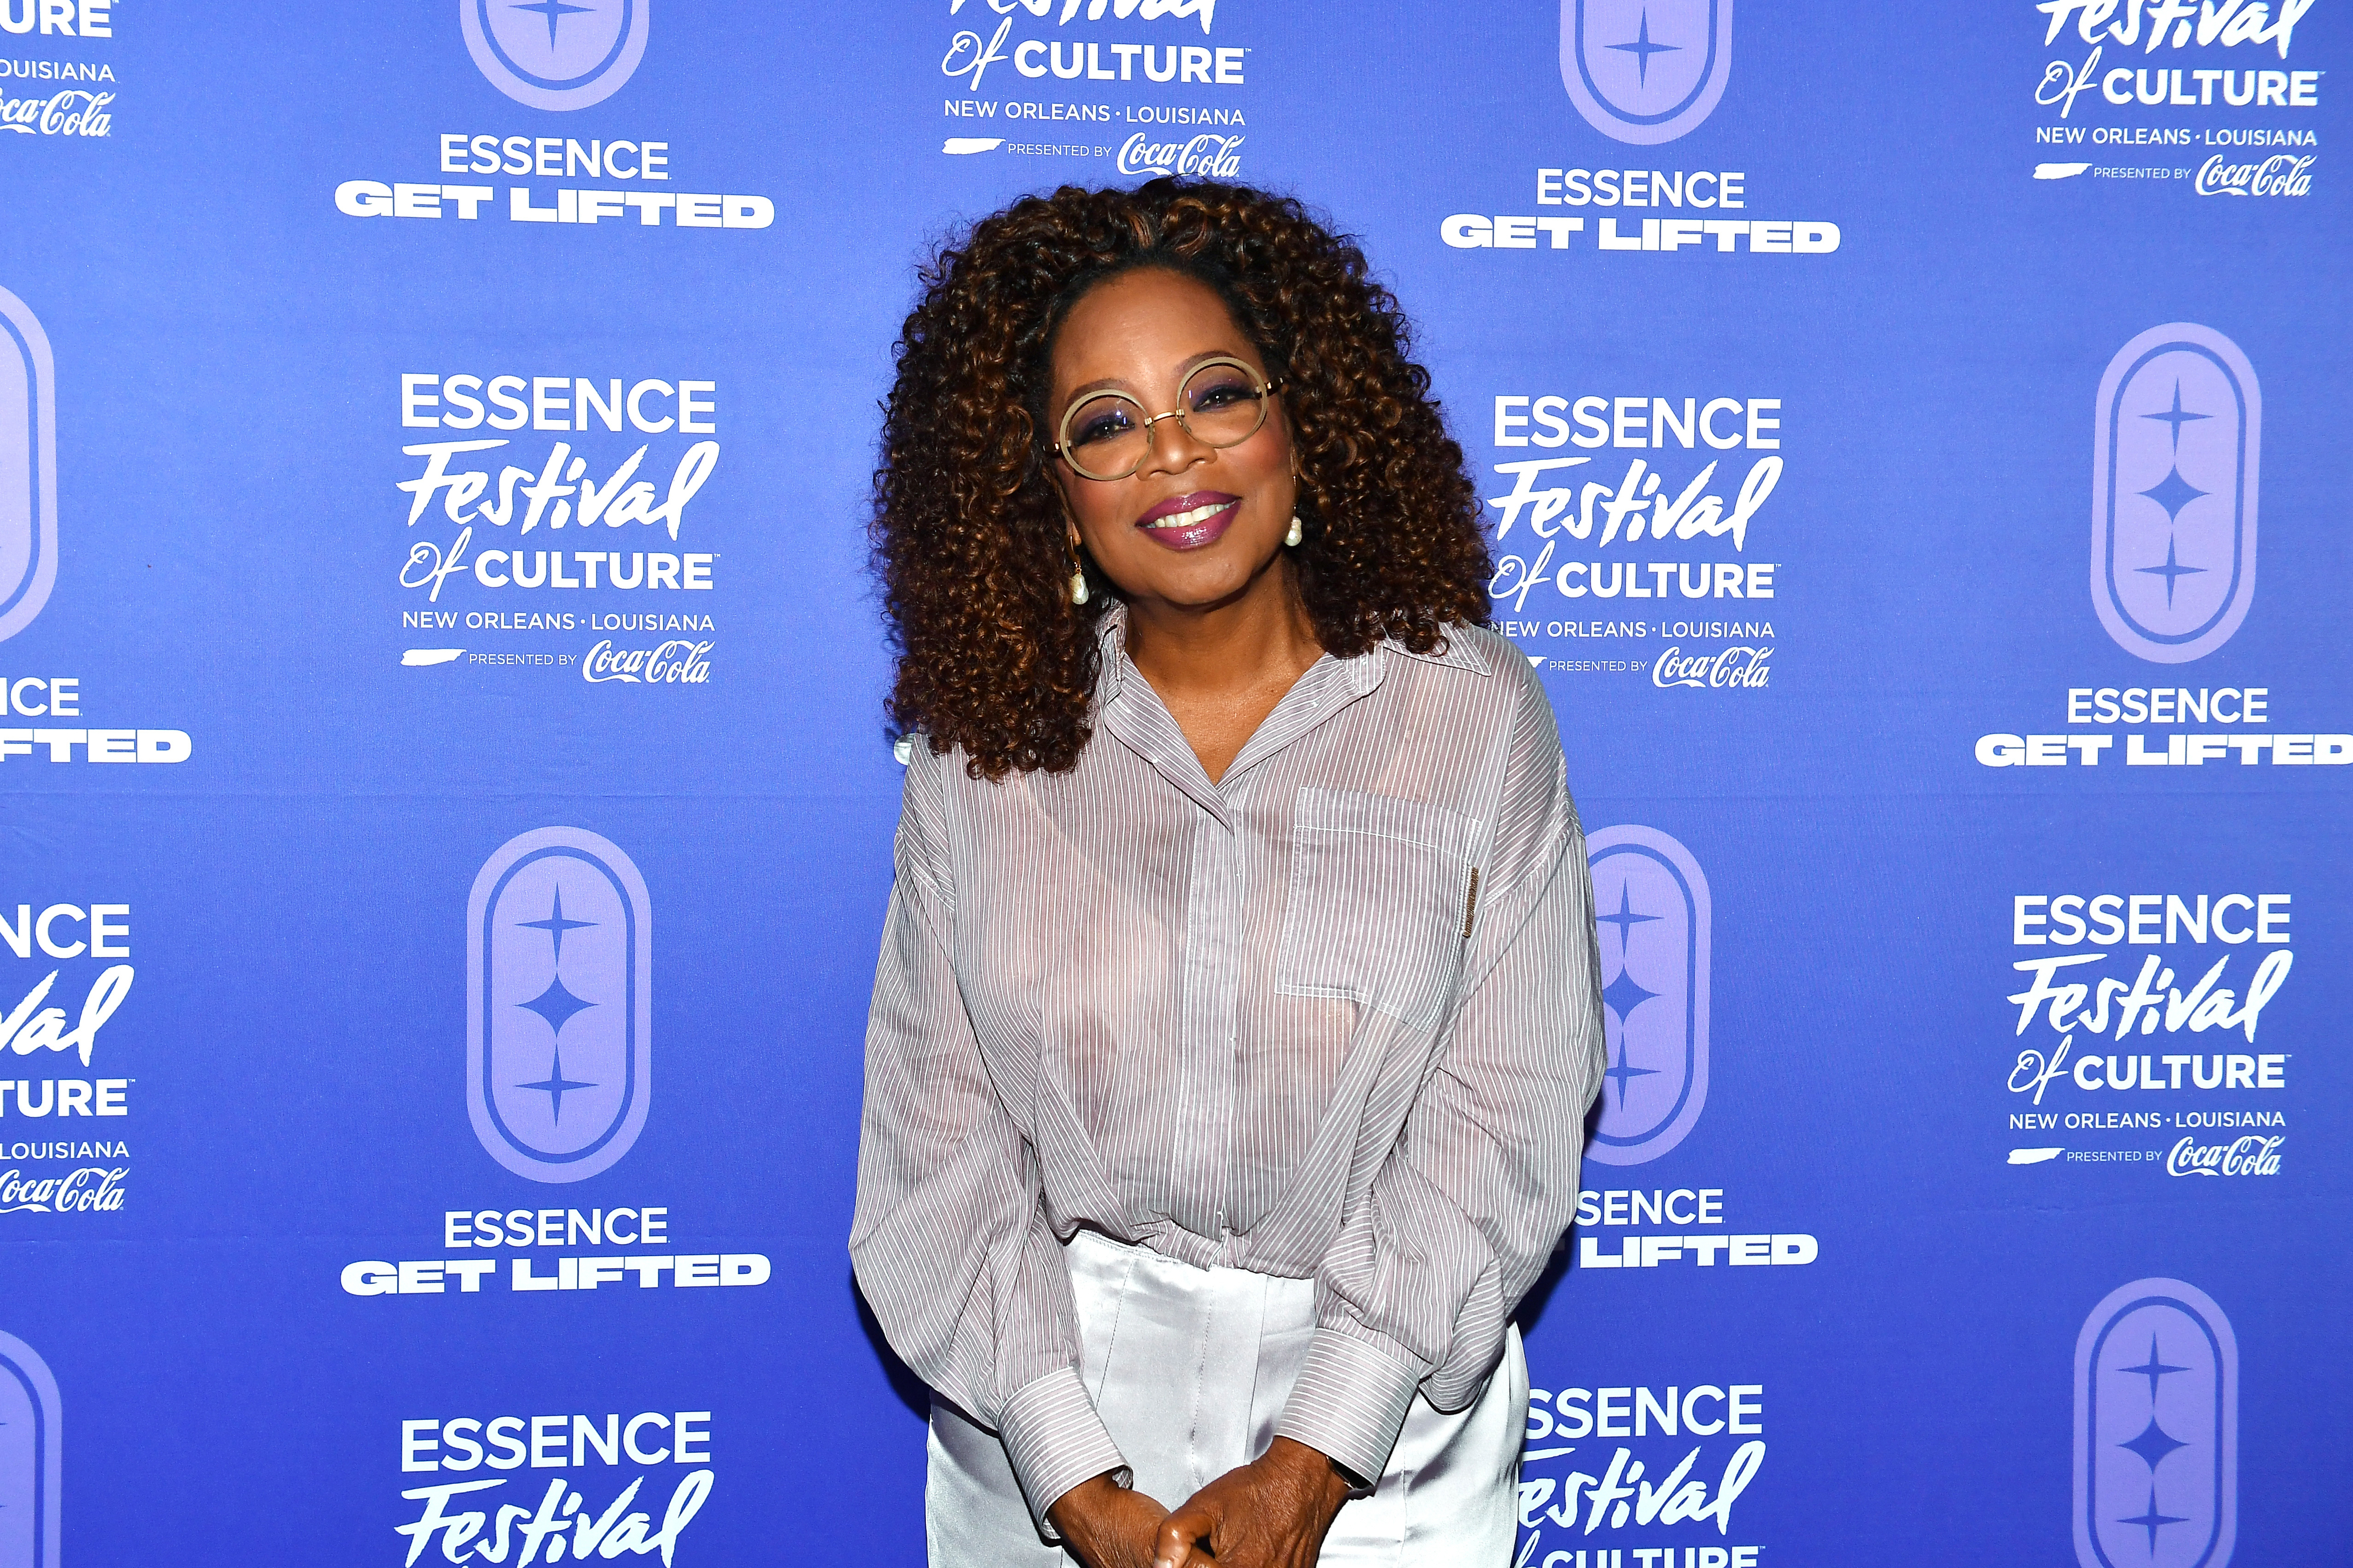 A close-up of Oprah smiling at an Essence event